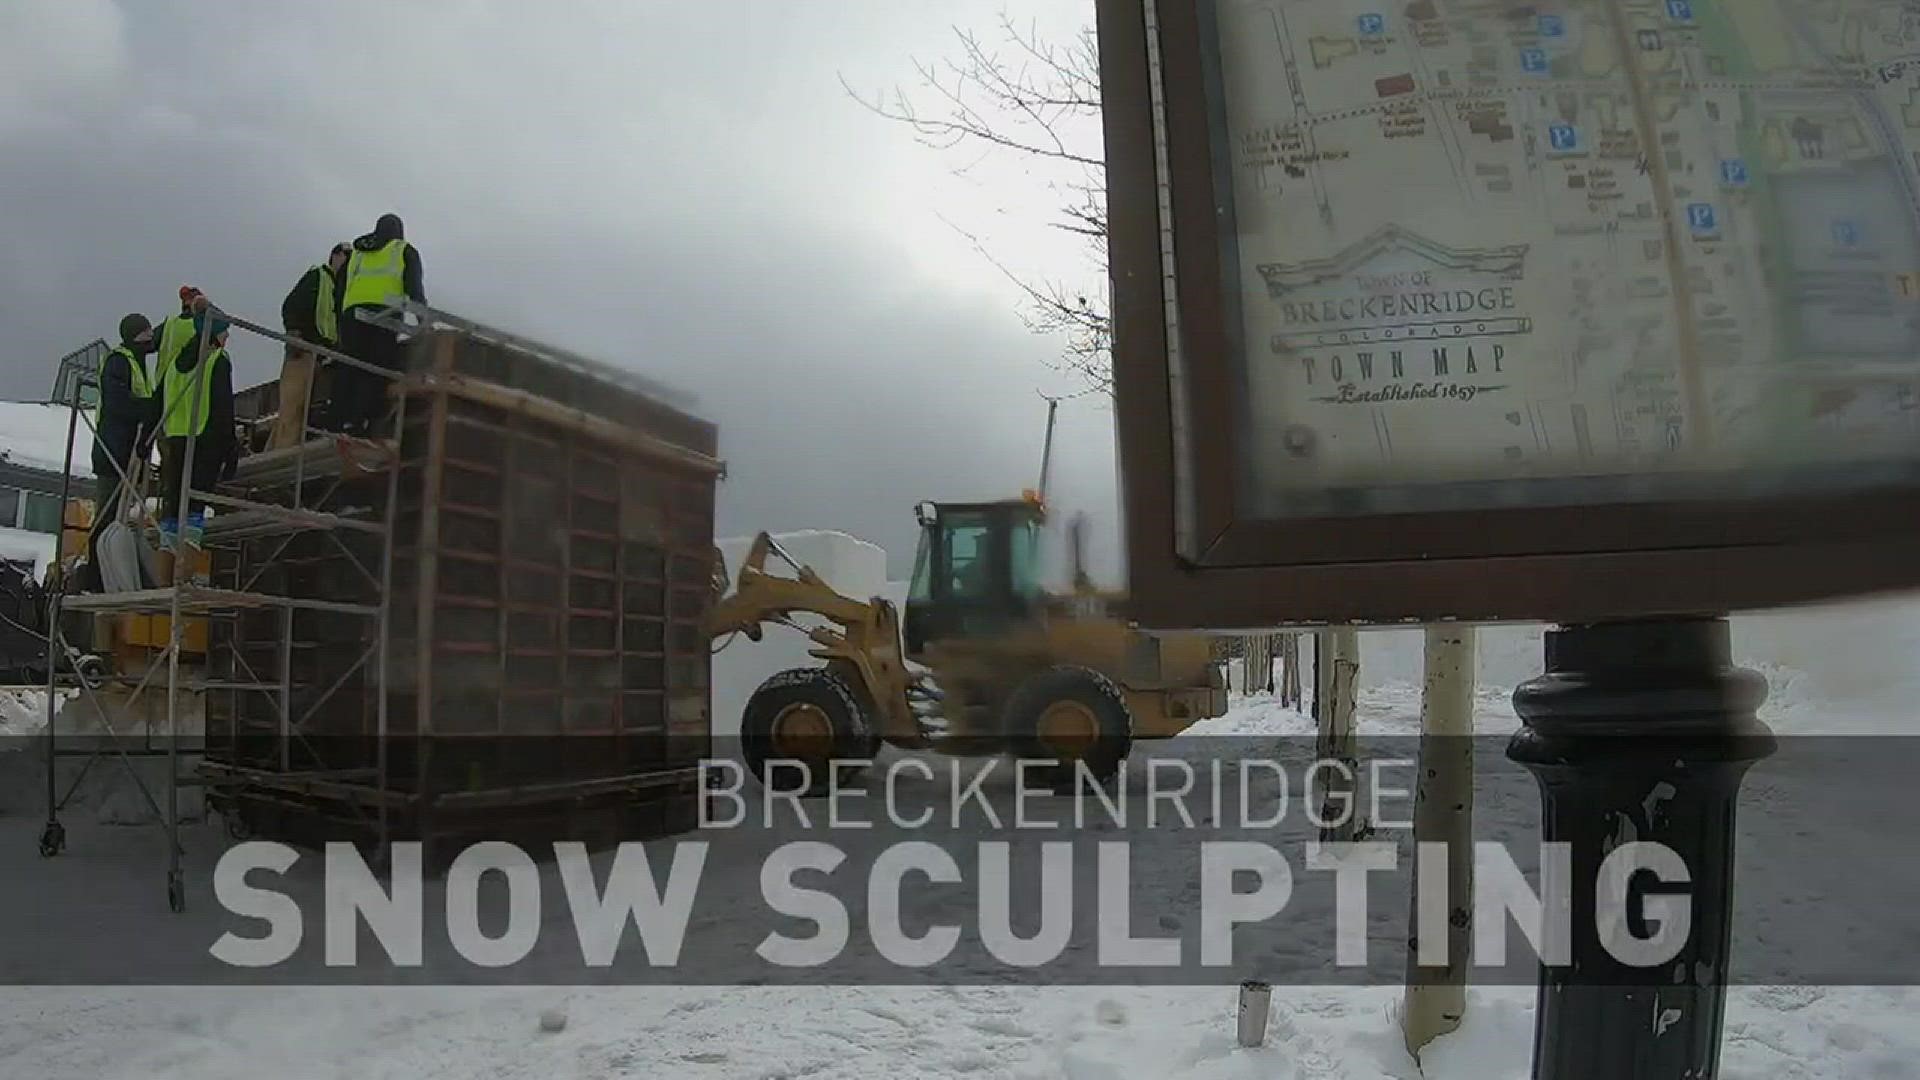 We head to Breckenridge where preparations are underway for Monday's snow sculpture competition and stop by a bowling alley to hear your good news for our staff picks for Friday, Jan. 18.